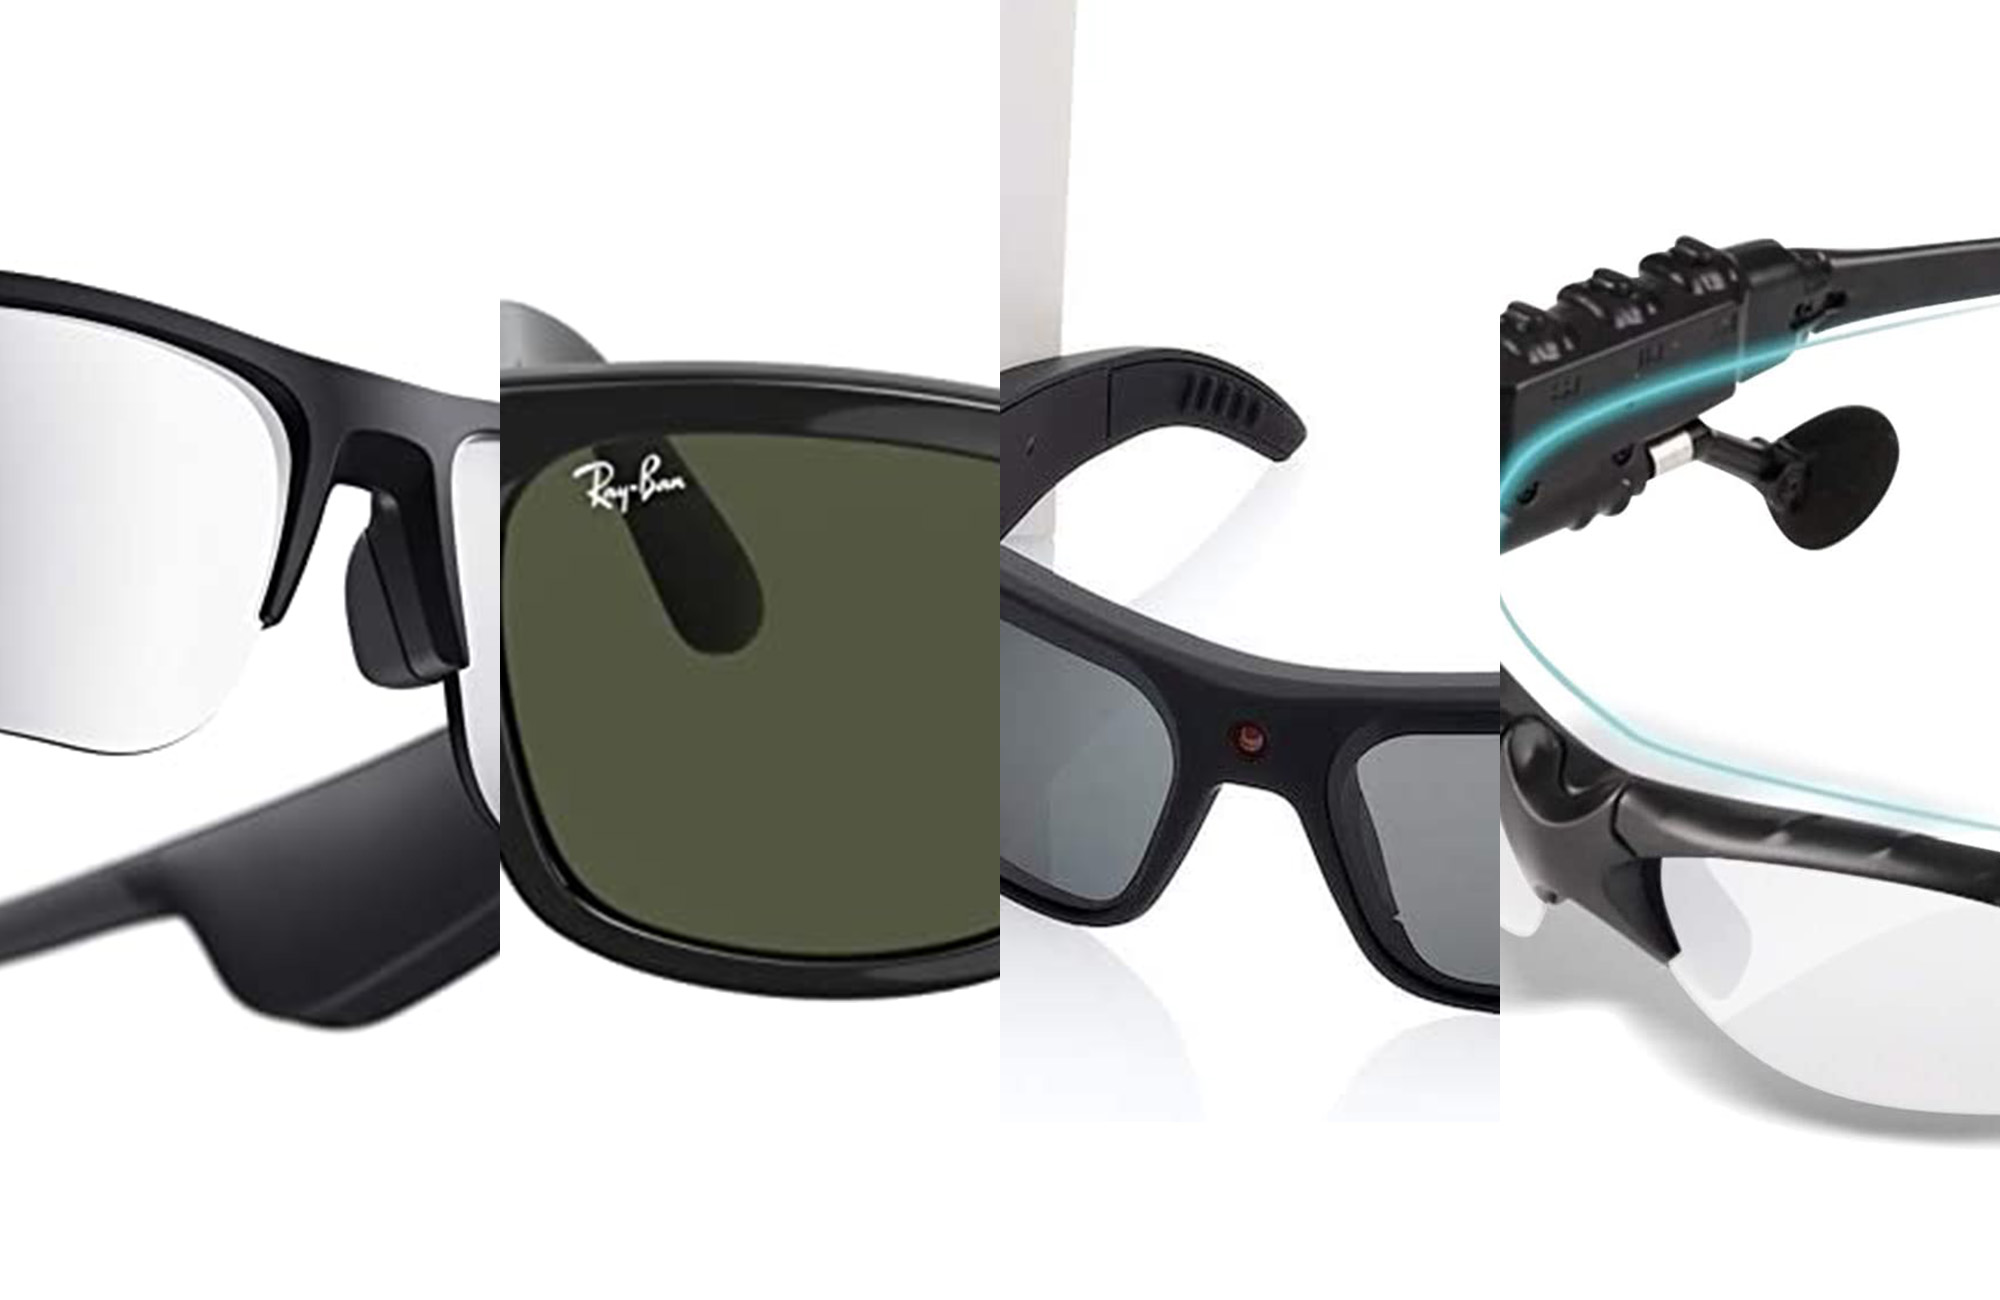 Smart sunglasses: What are they and what all can they do?